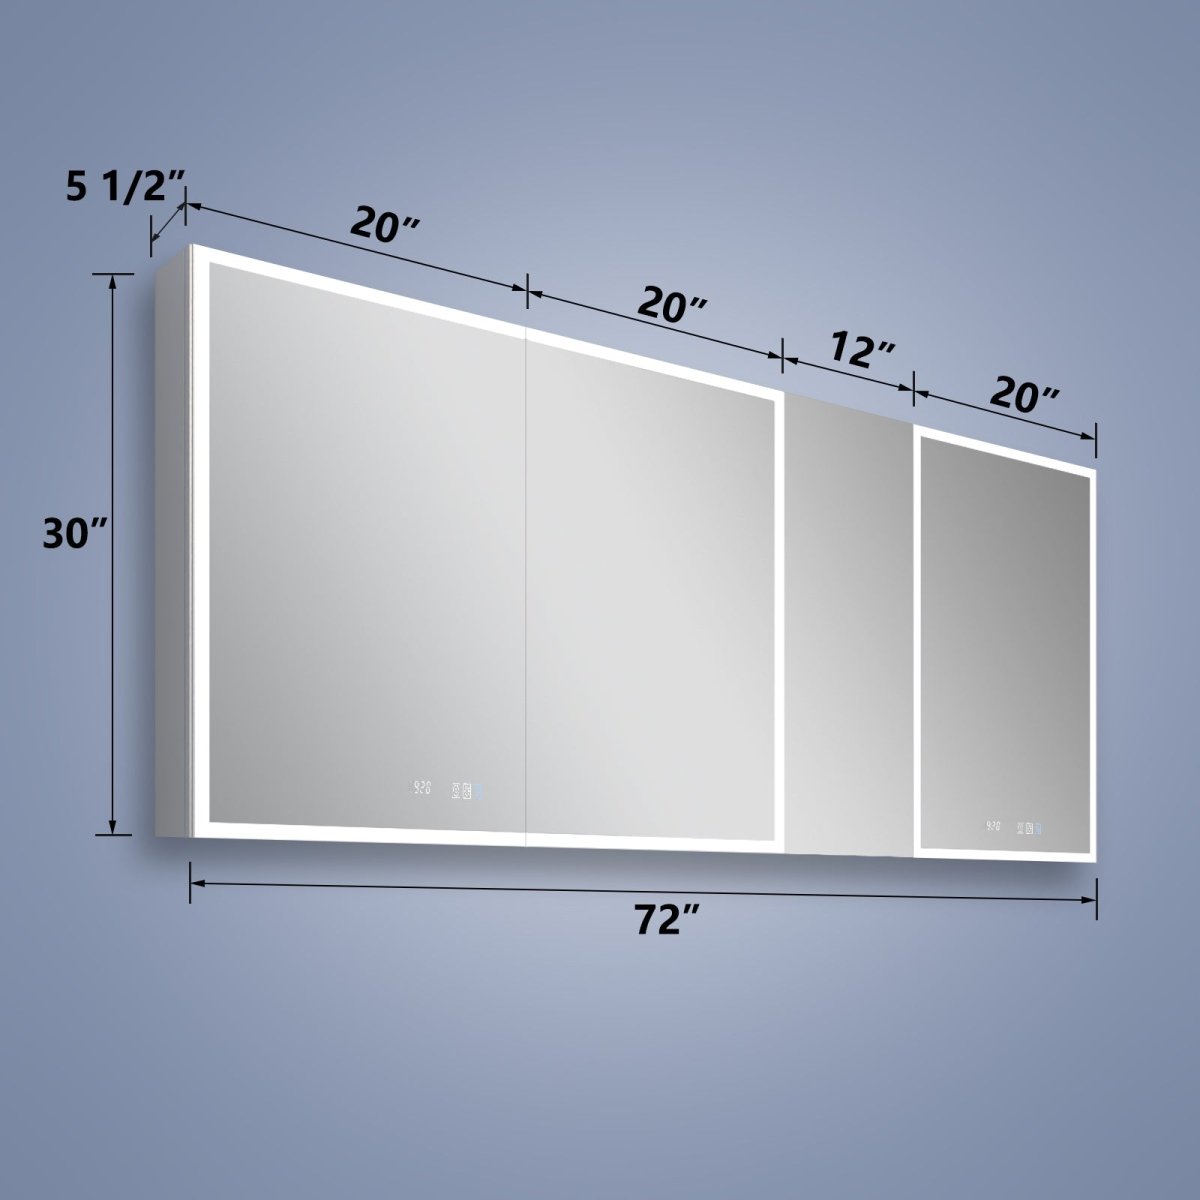 Rim 72" W x 30" H Led Lighted Big Medicine Cabinet Recessed or Surface with Mirrors and Clock